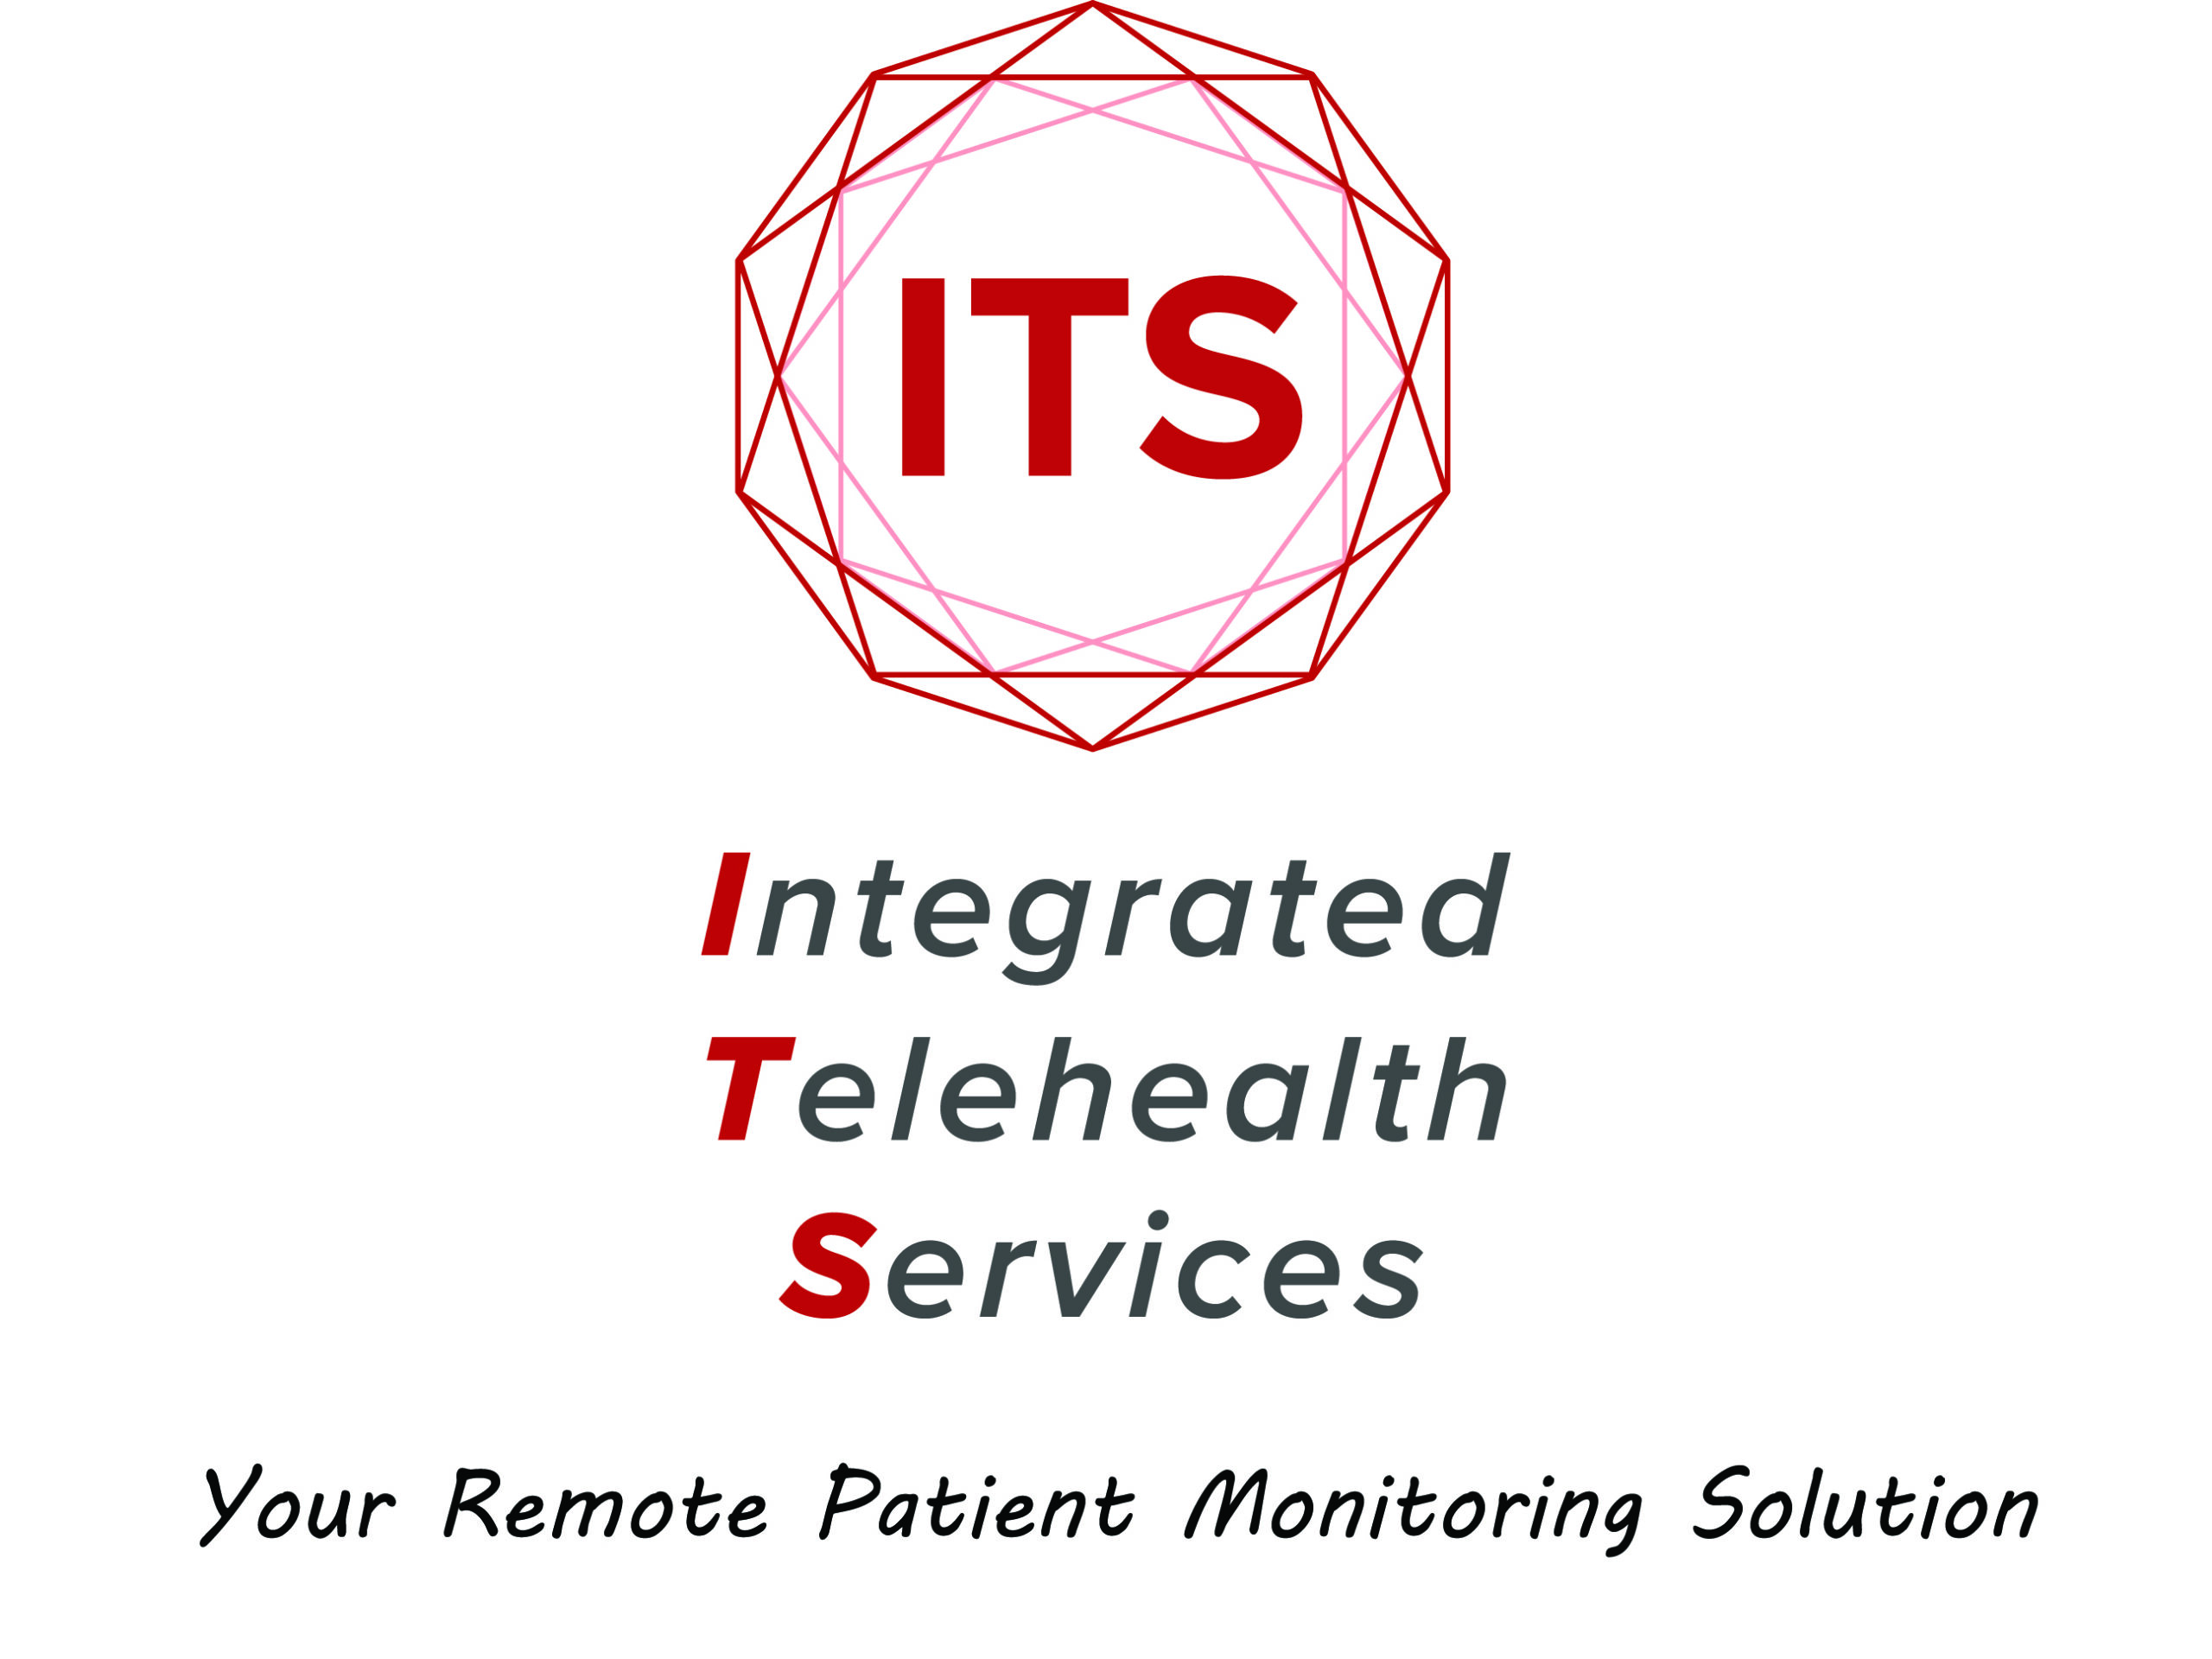 Integrated Telehealth Services